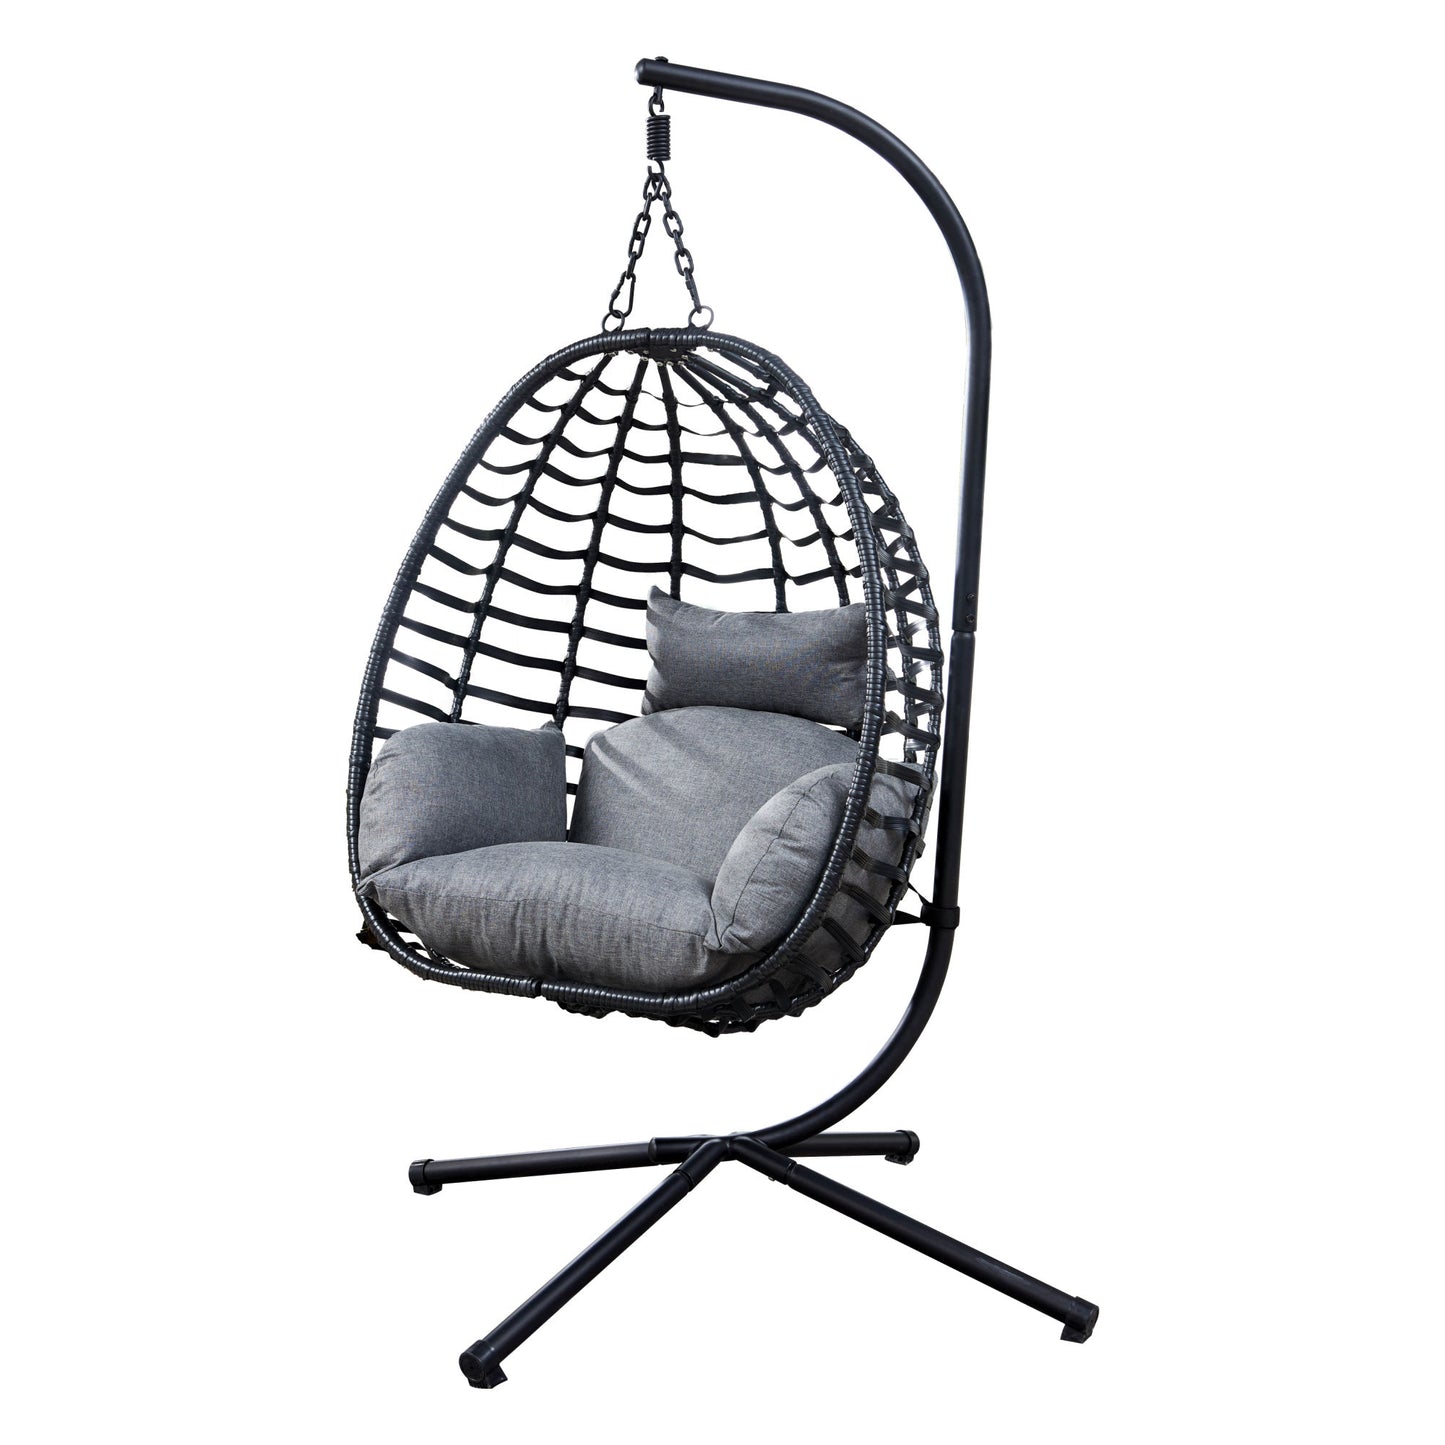 Outdoor Wicker Swing Chair With Stand for Balcony